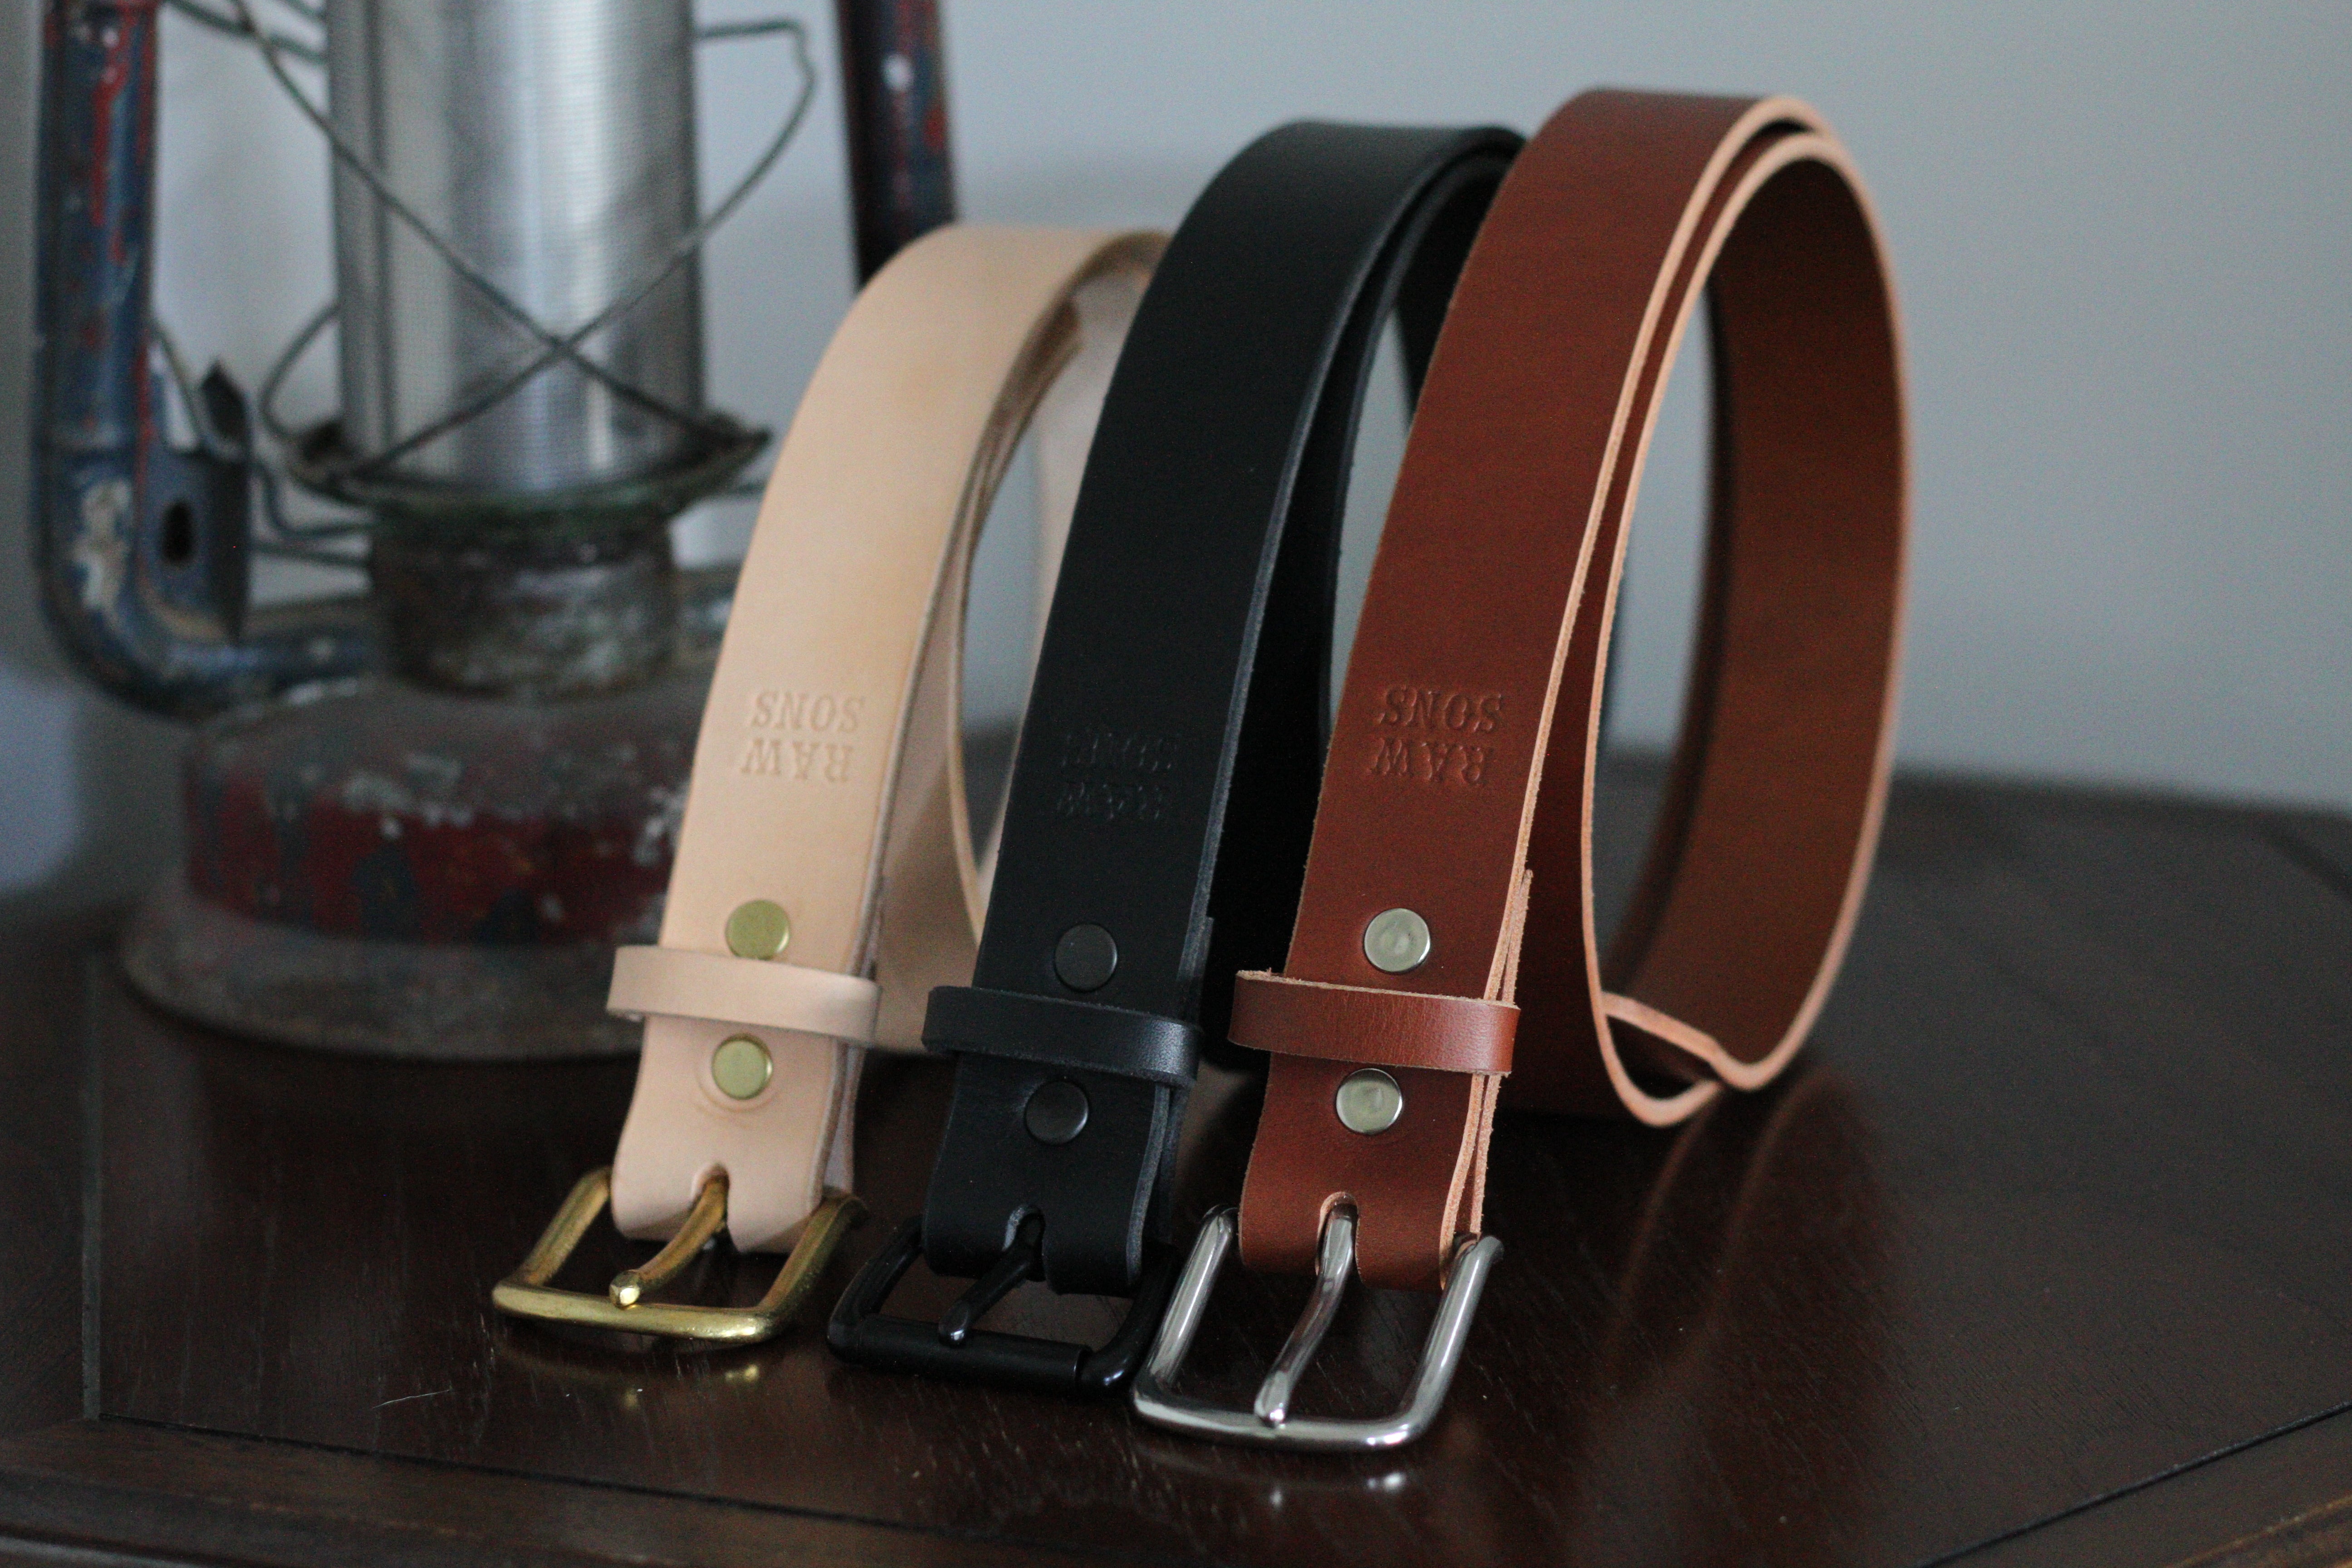 Rogue Leather Belt - Handmade High-Quality Leather Belt, Made in